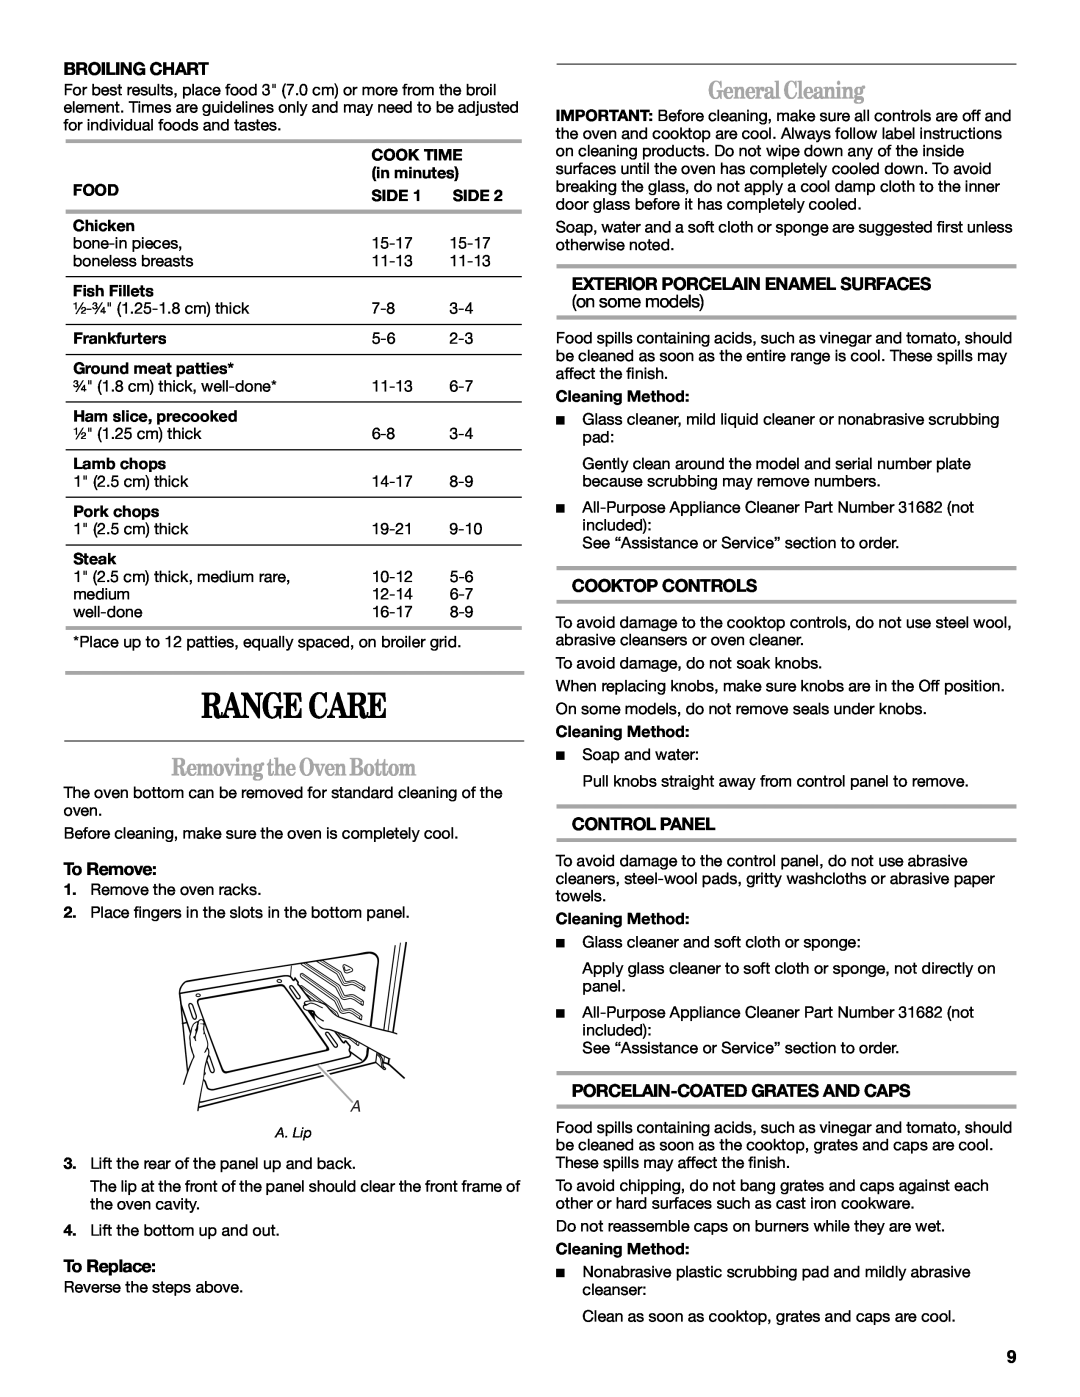 Whirlpool W10309091A manual Range Care, Removing the OvenBottom, GeneralCleaning, Broiling Chart, To Remove, To Replace 